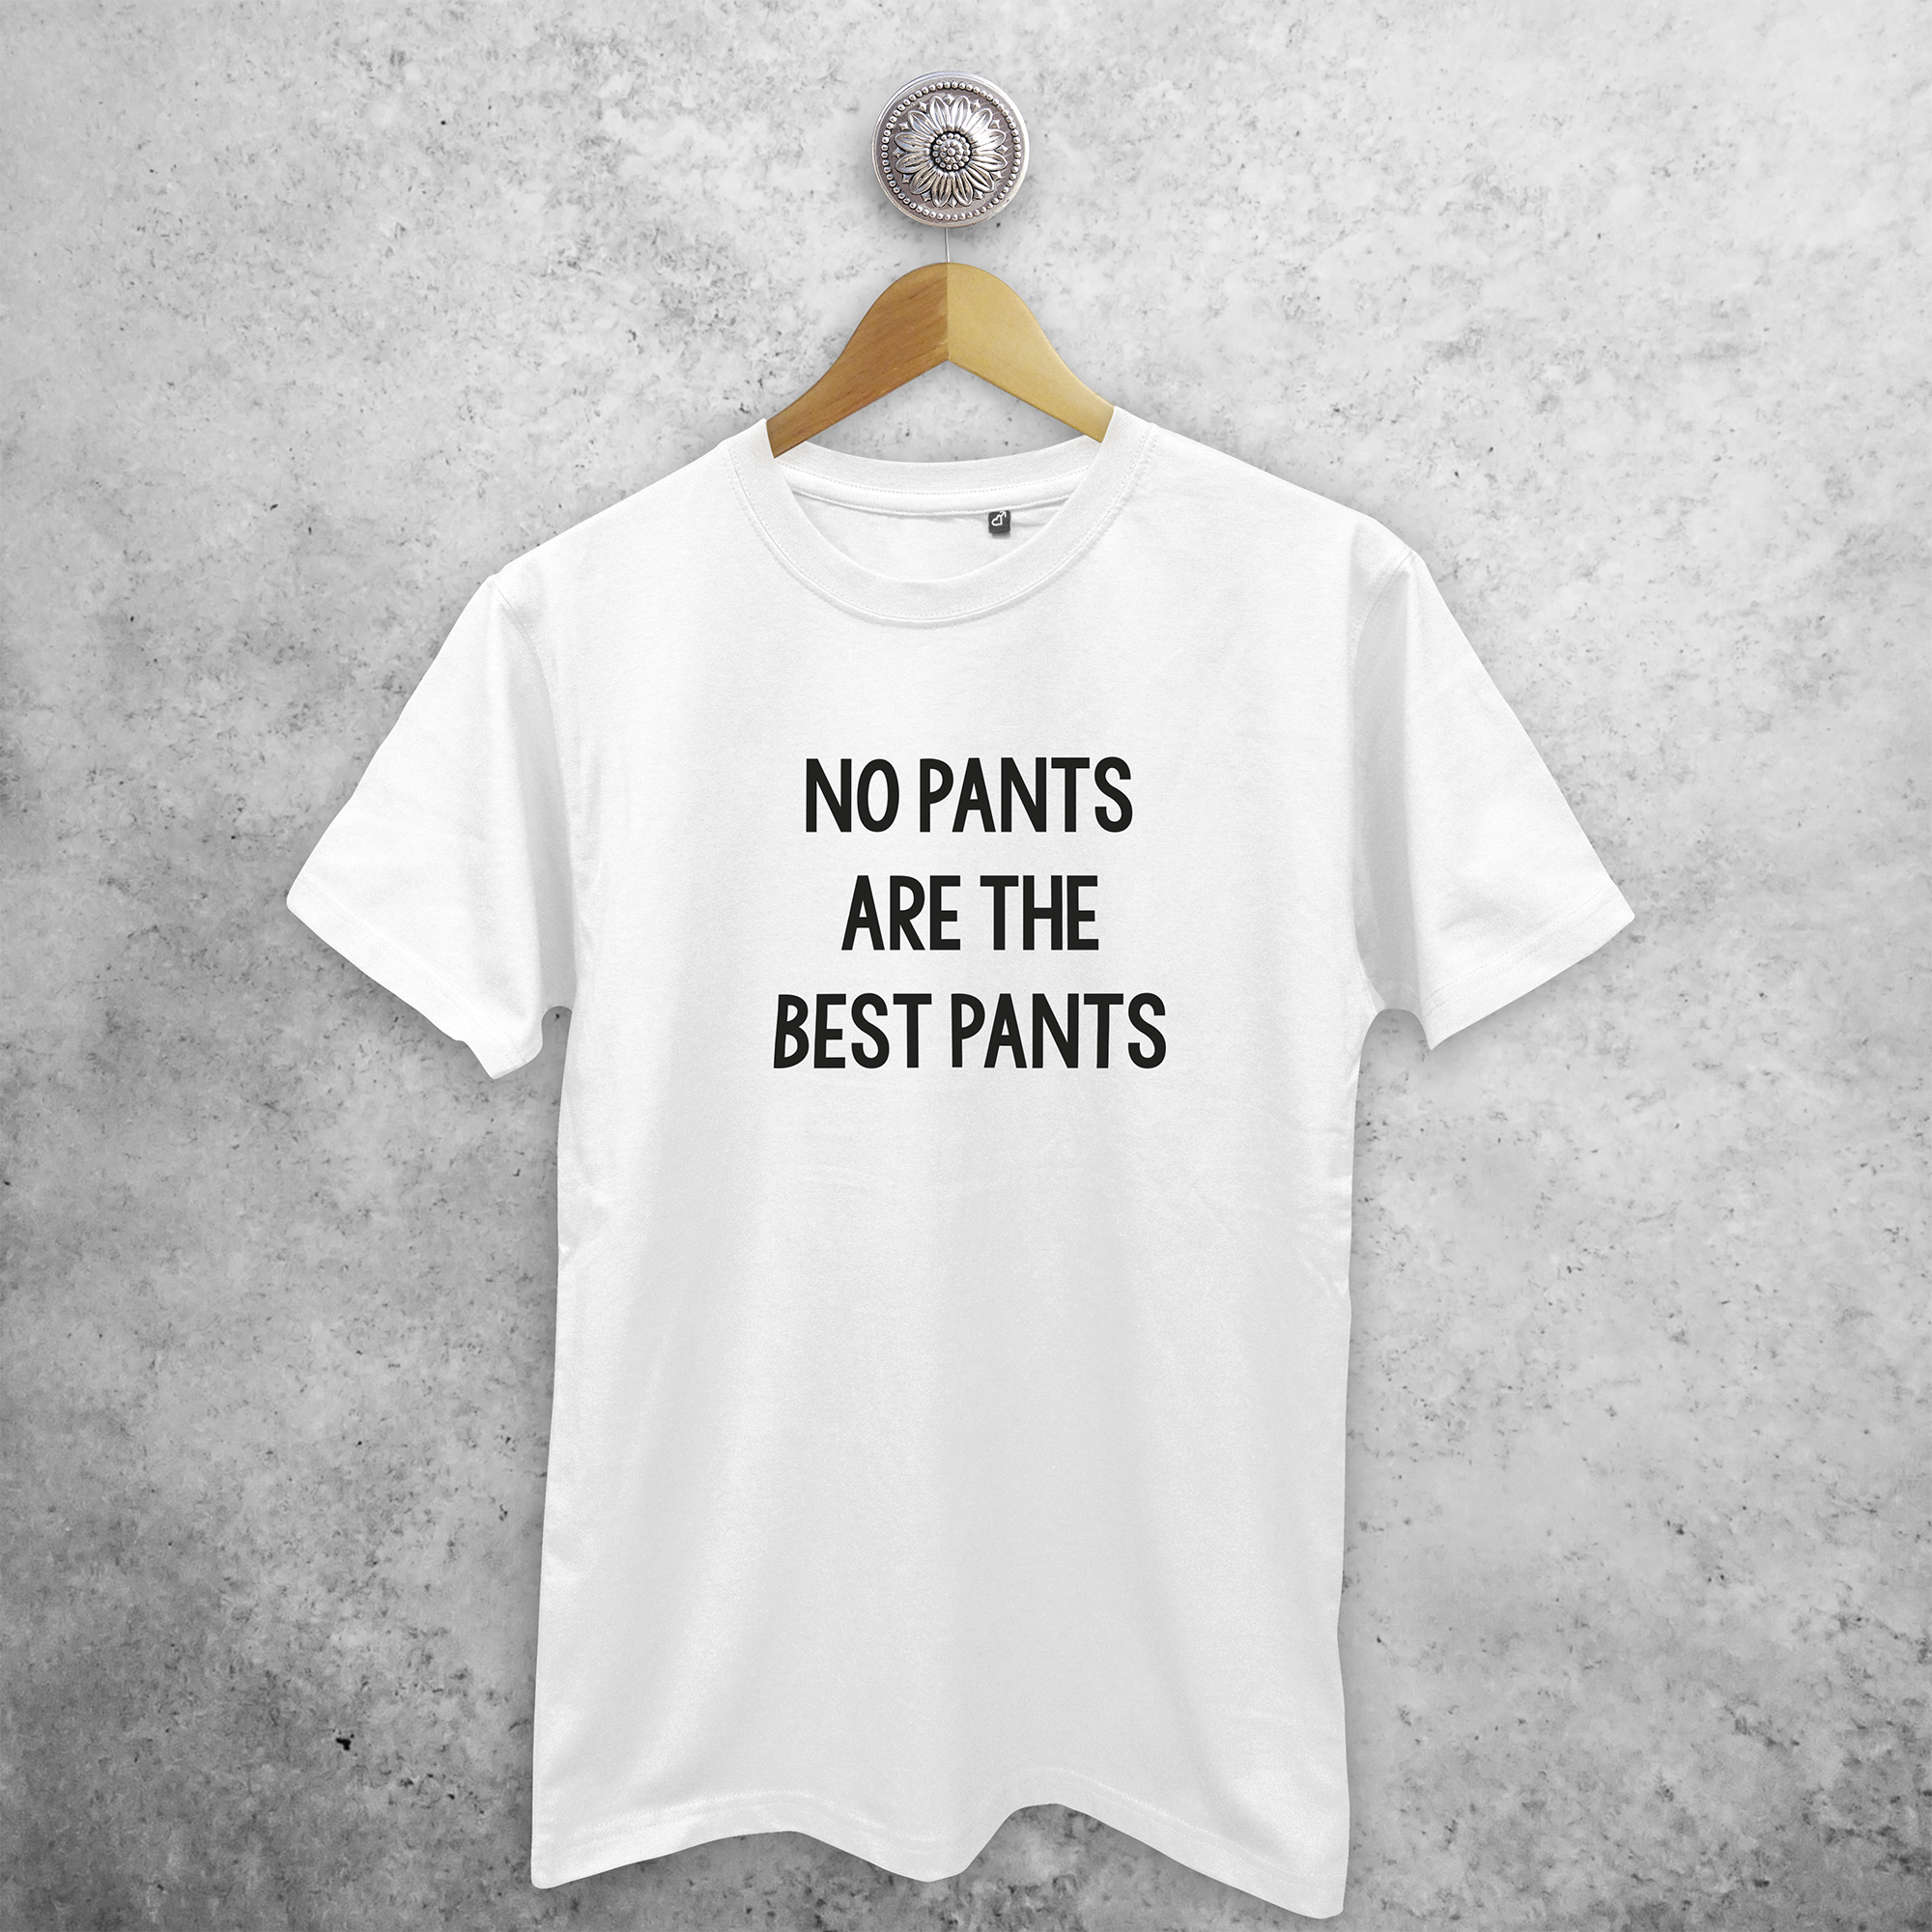 'No pants are the best pants' adult shirt